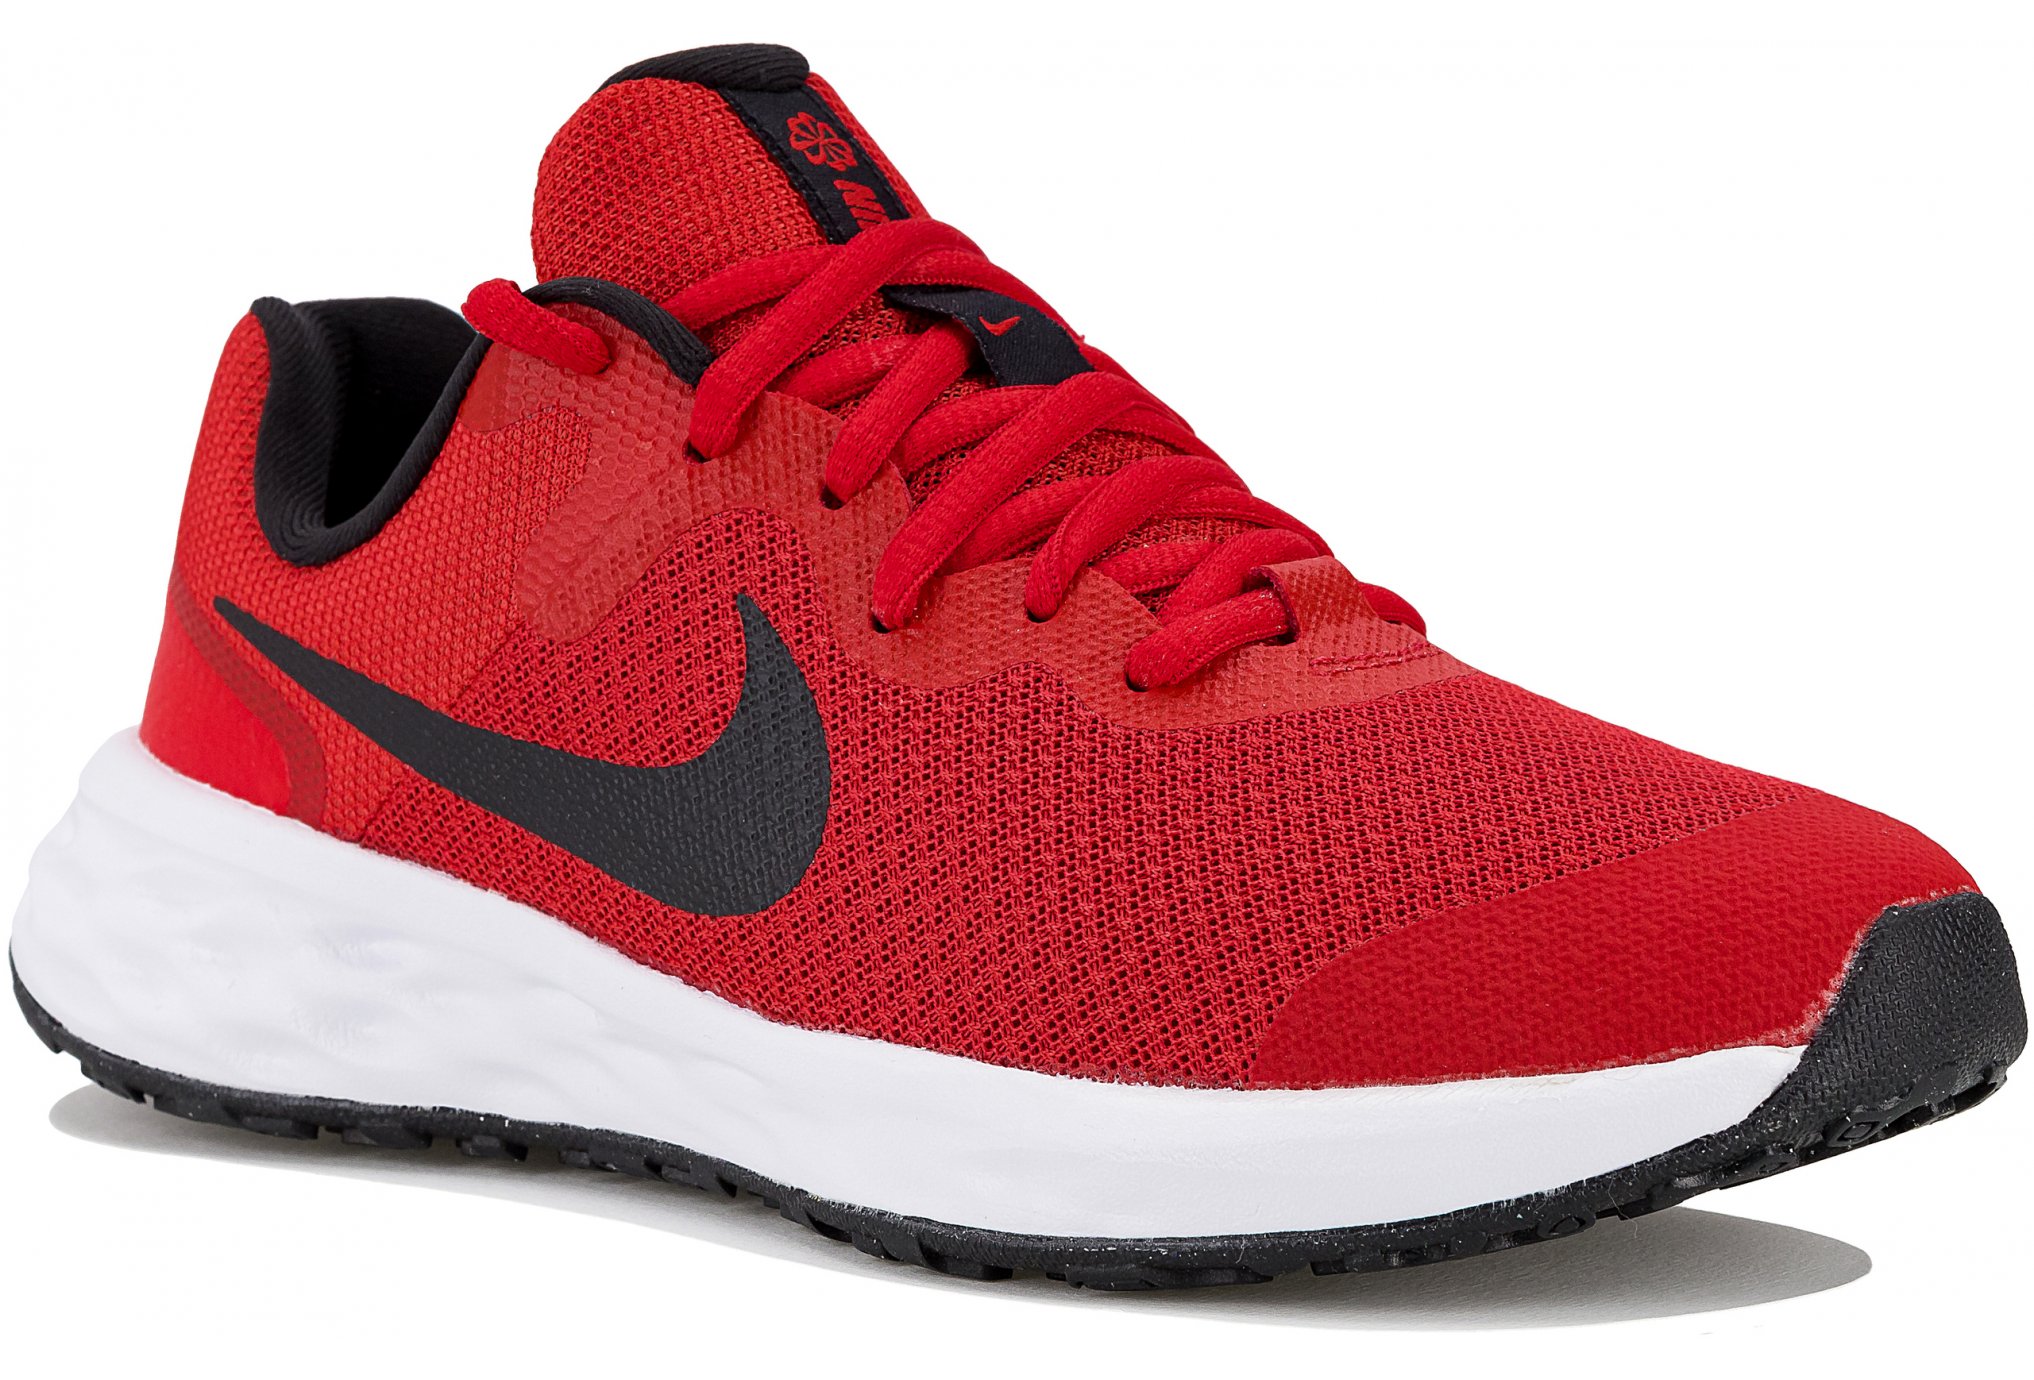 Chaussures homme Nike - Achat / Vente Chaussures homme Nike pas